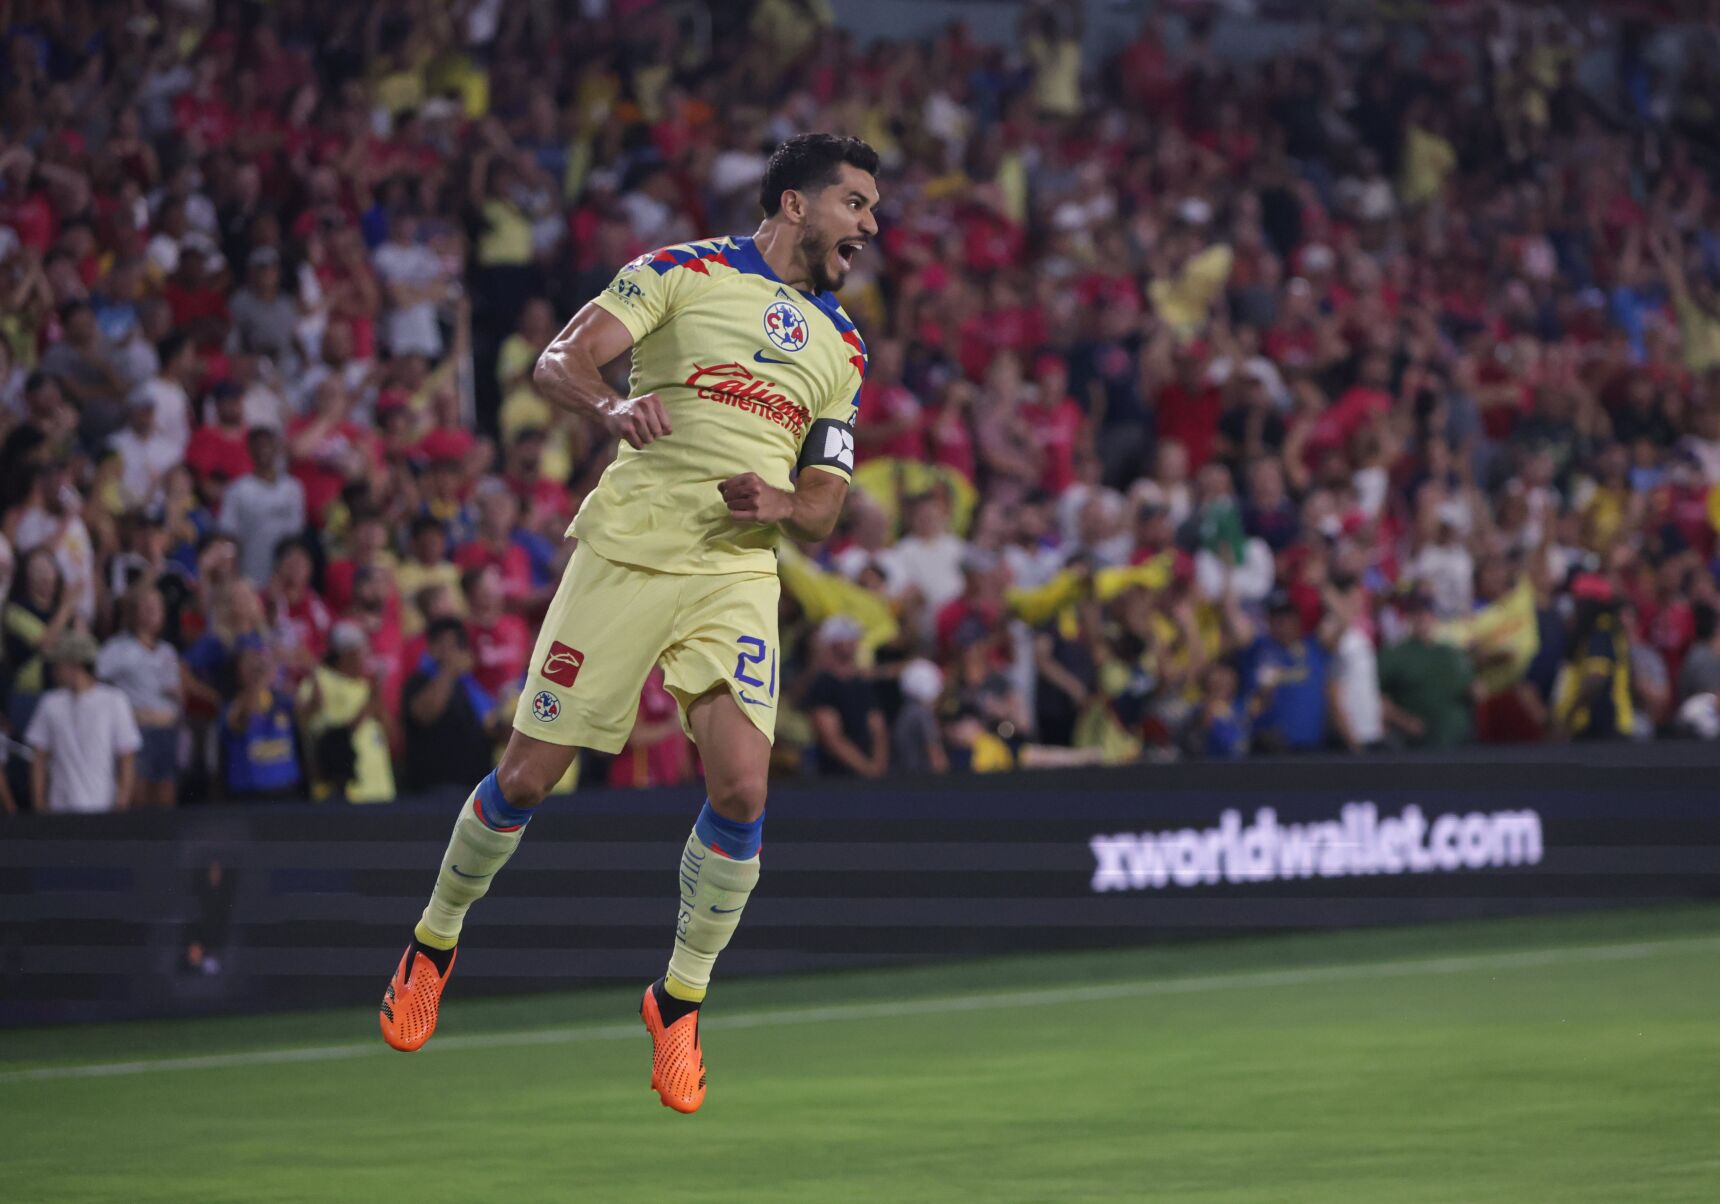 City SC is no match for Club America, falls 4-0 to get knocked out of Leagues Cup